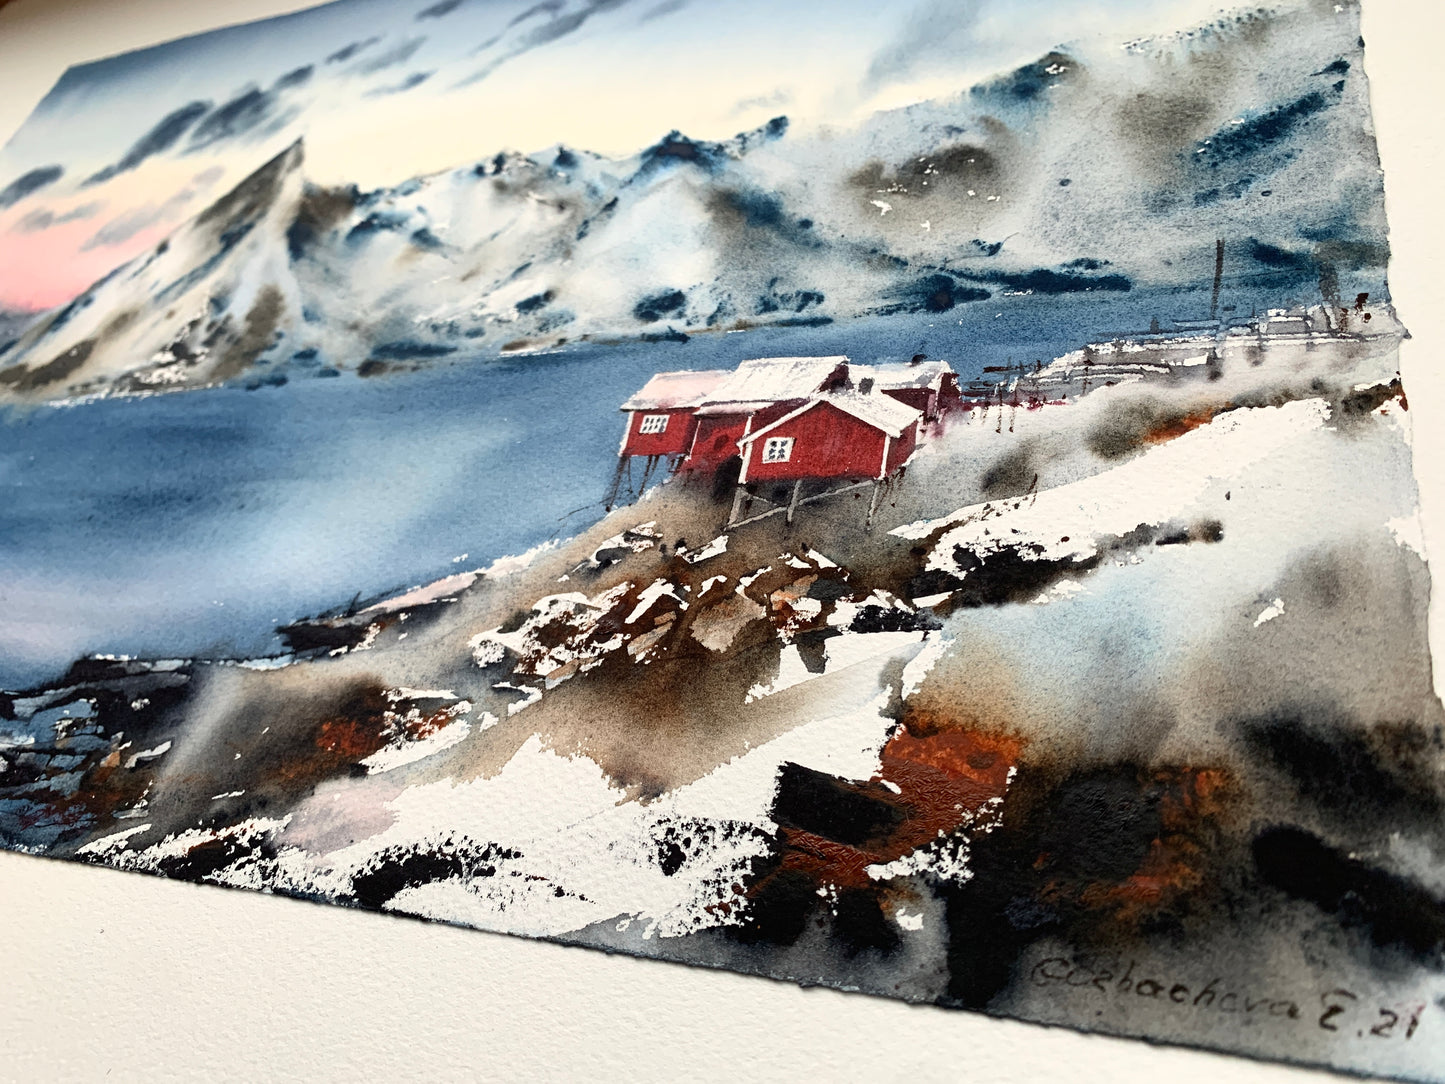 Lofoten Islands Watercolor Painting Original - Red house in the fjords - 22x15 in